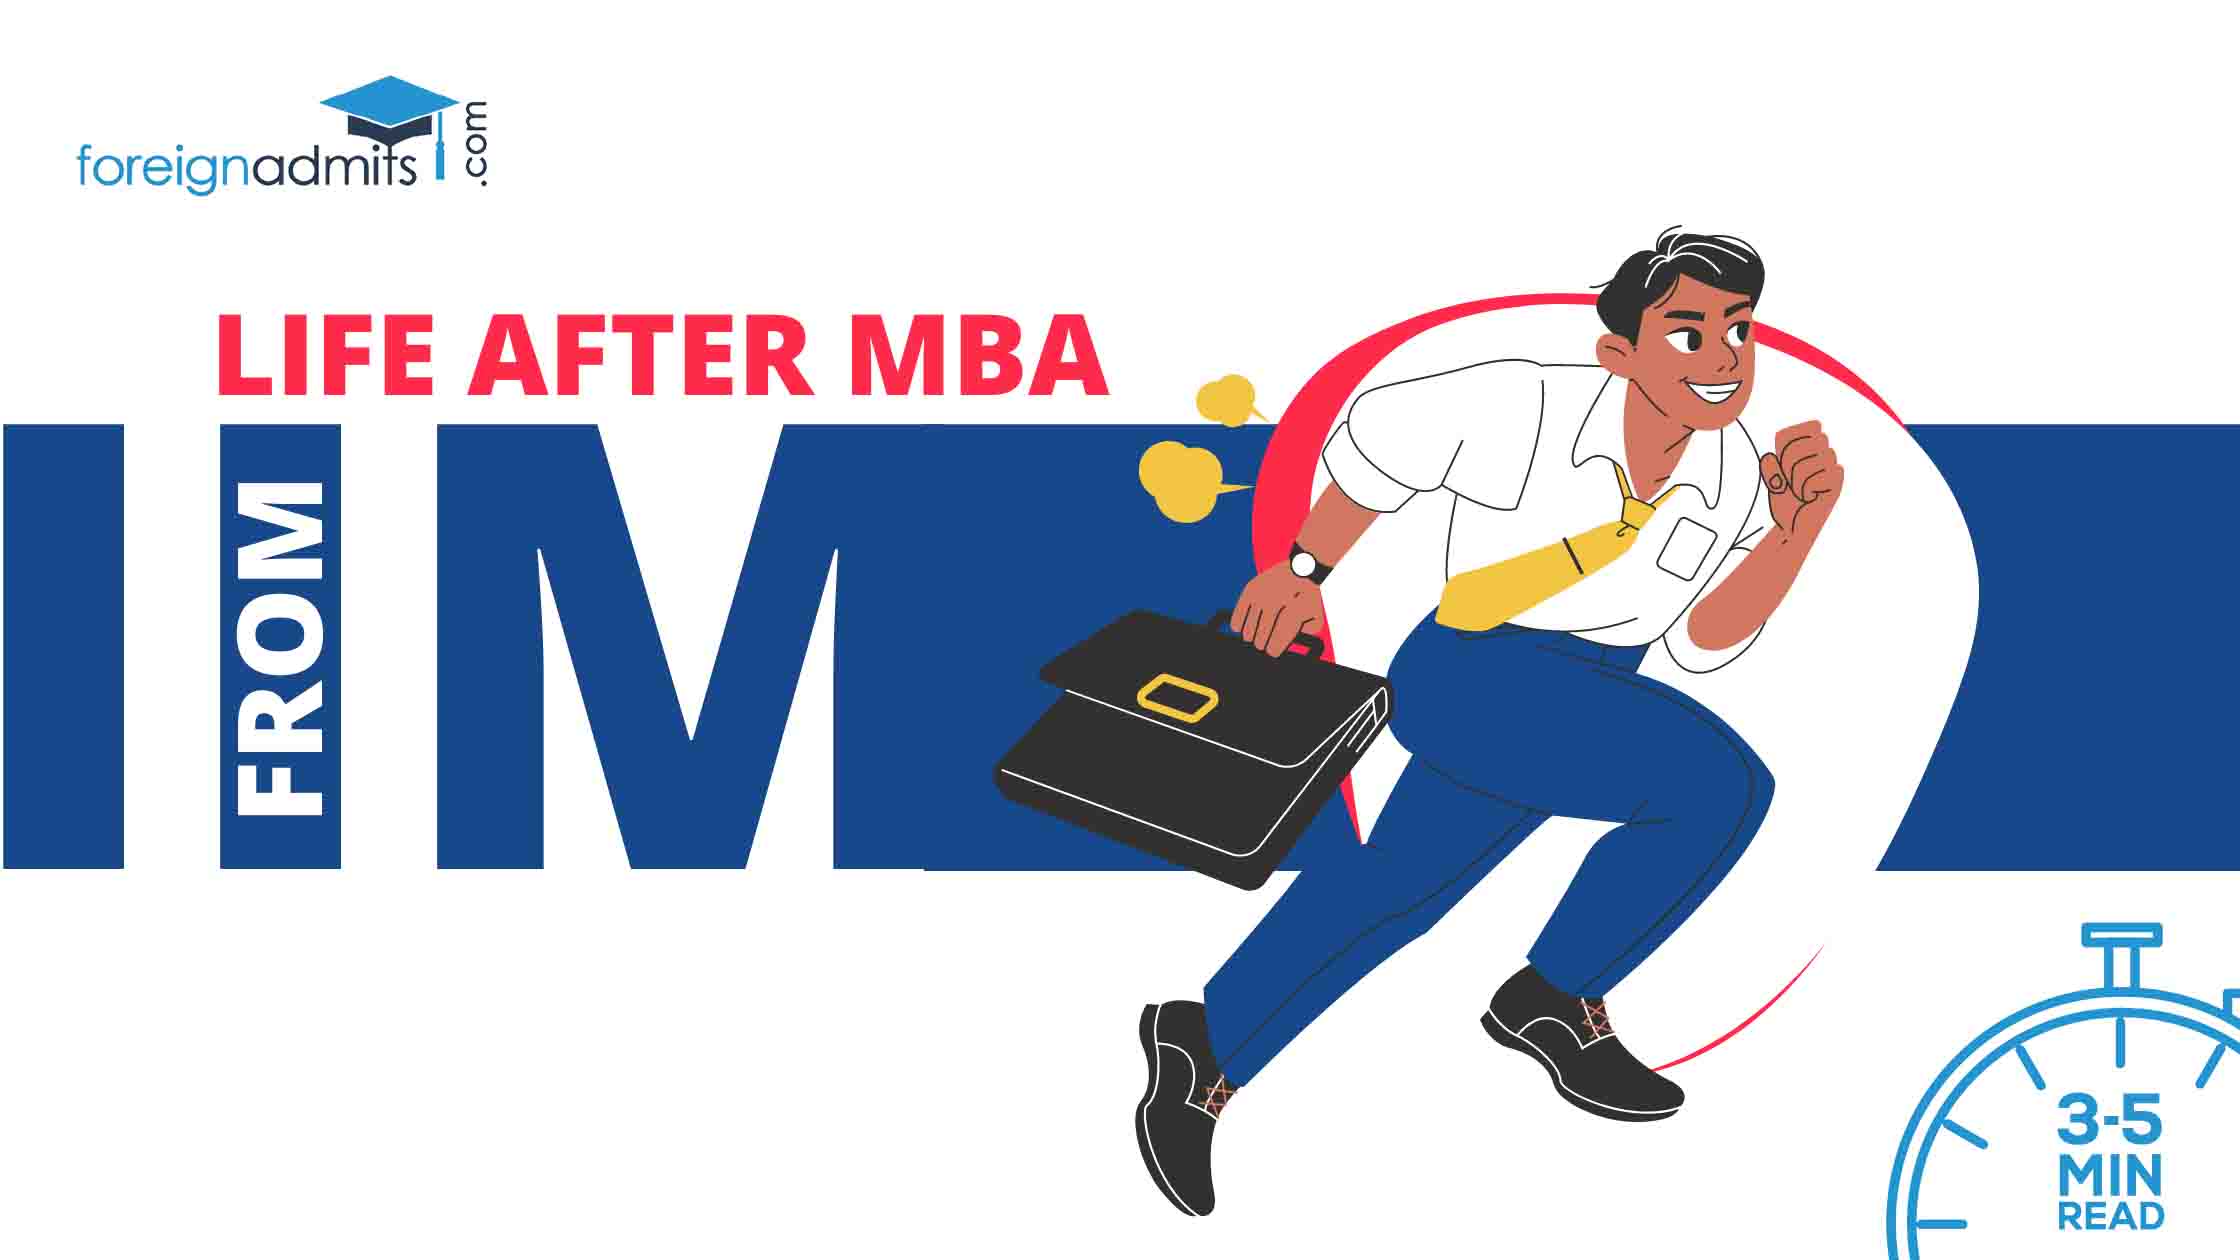 Life after MBA from IIM